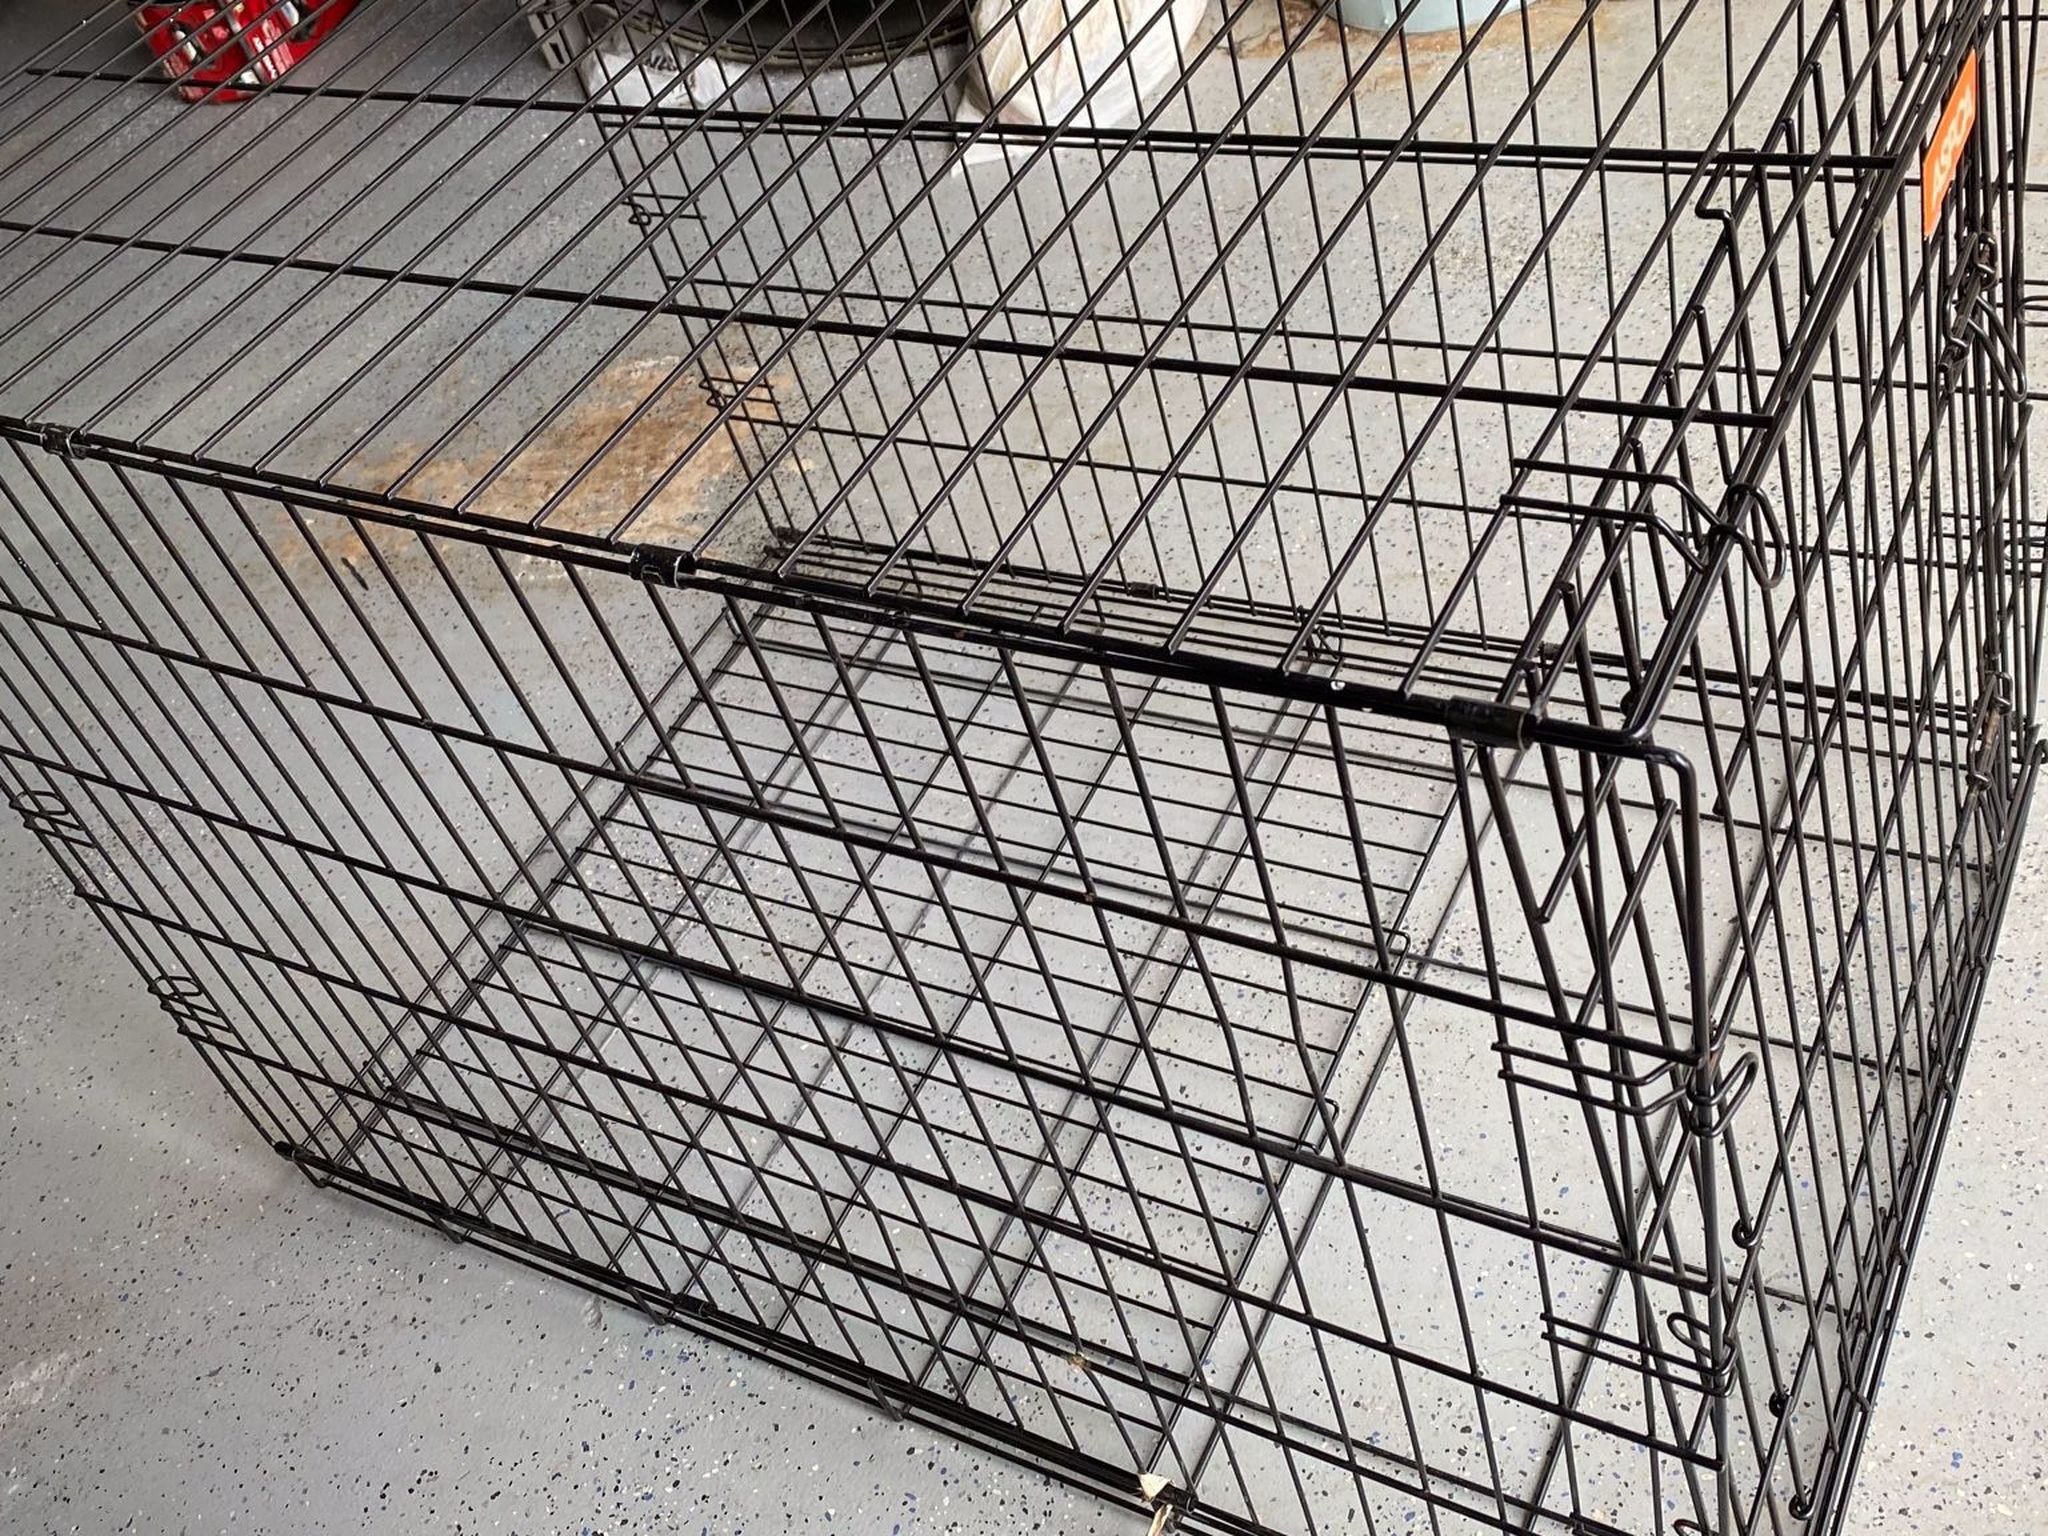 Dog Cage - Large - 27”X42” - 30” Tall - With One Door -The Cage Folds Down Flat